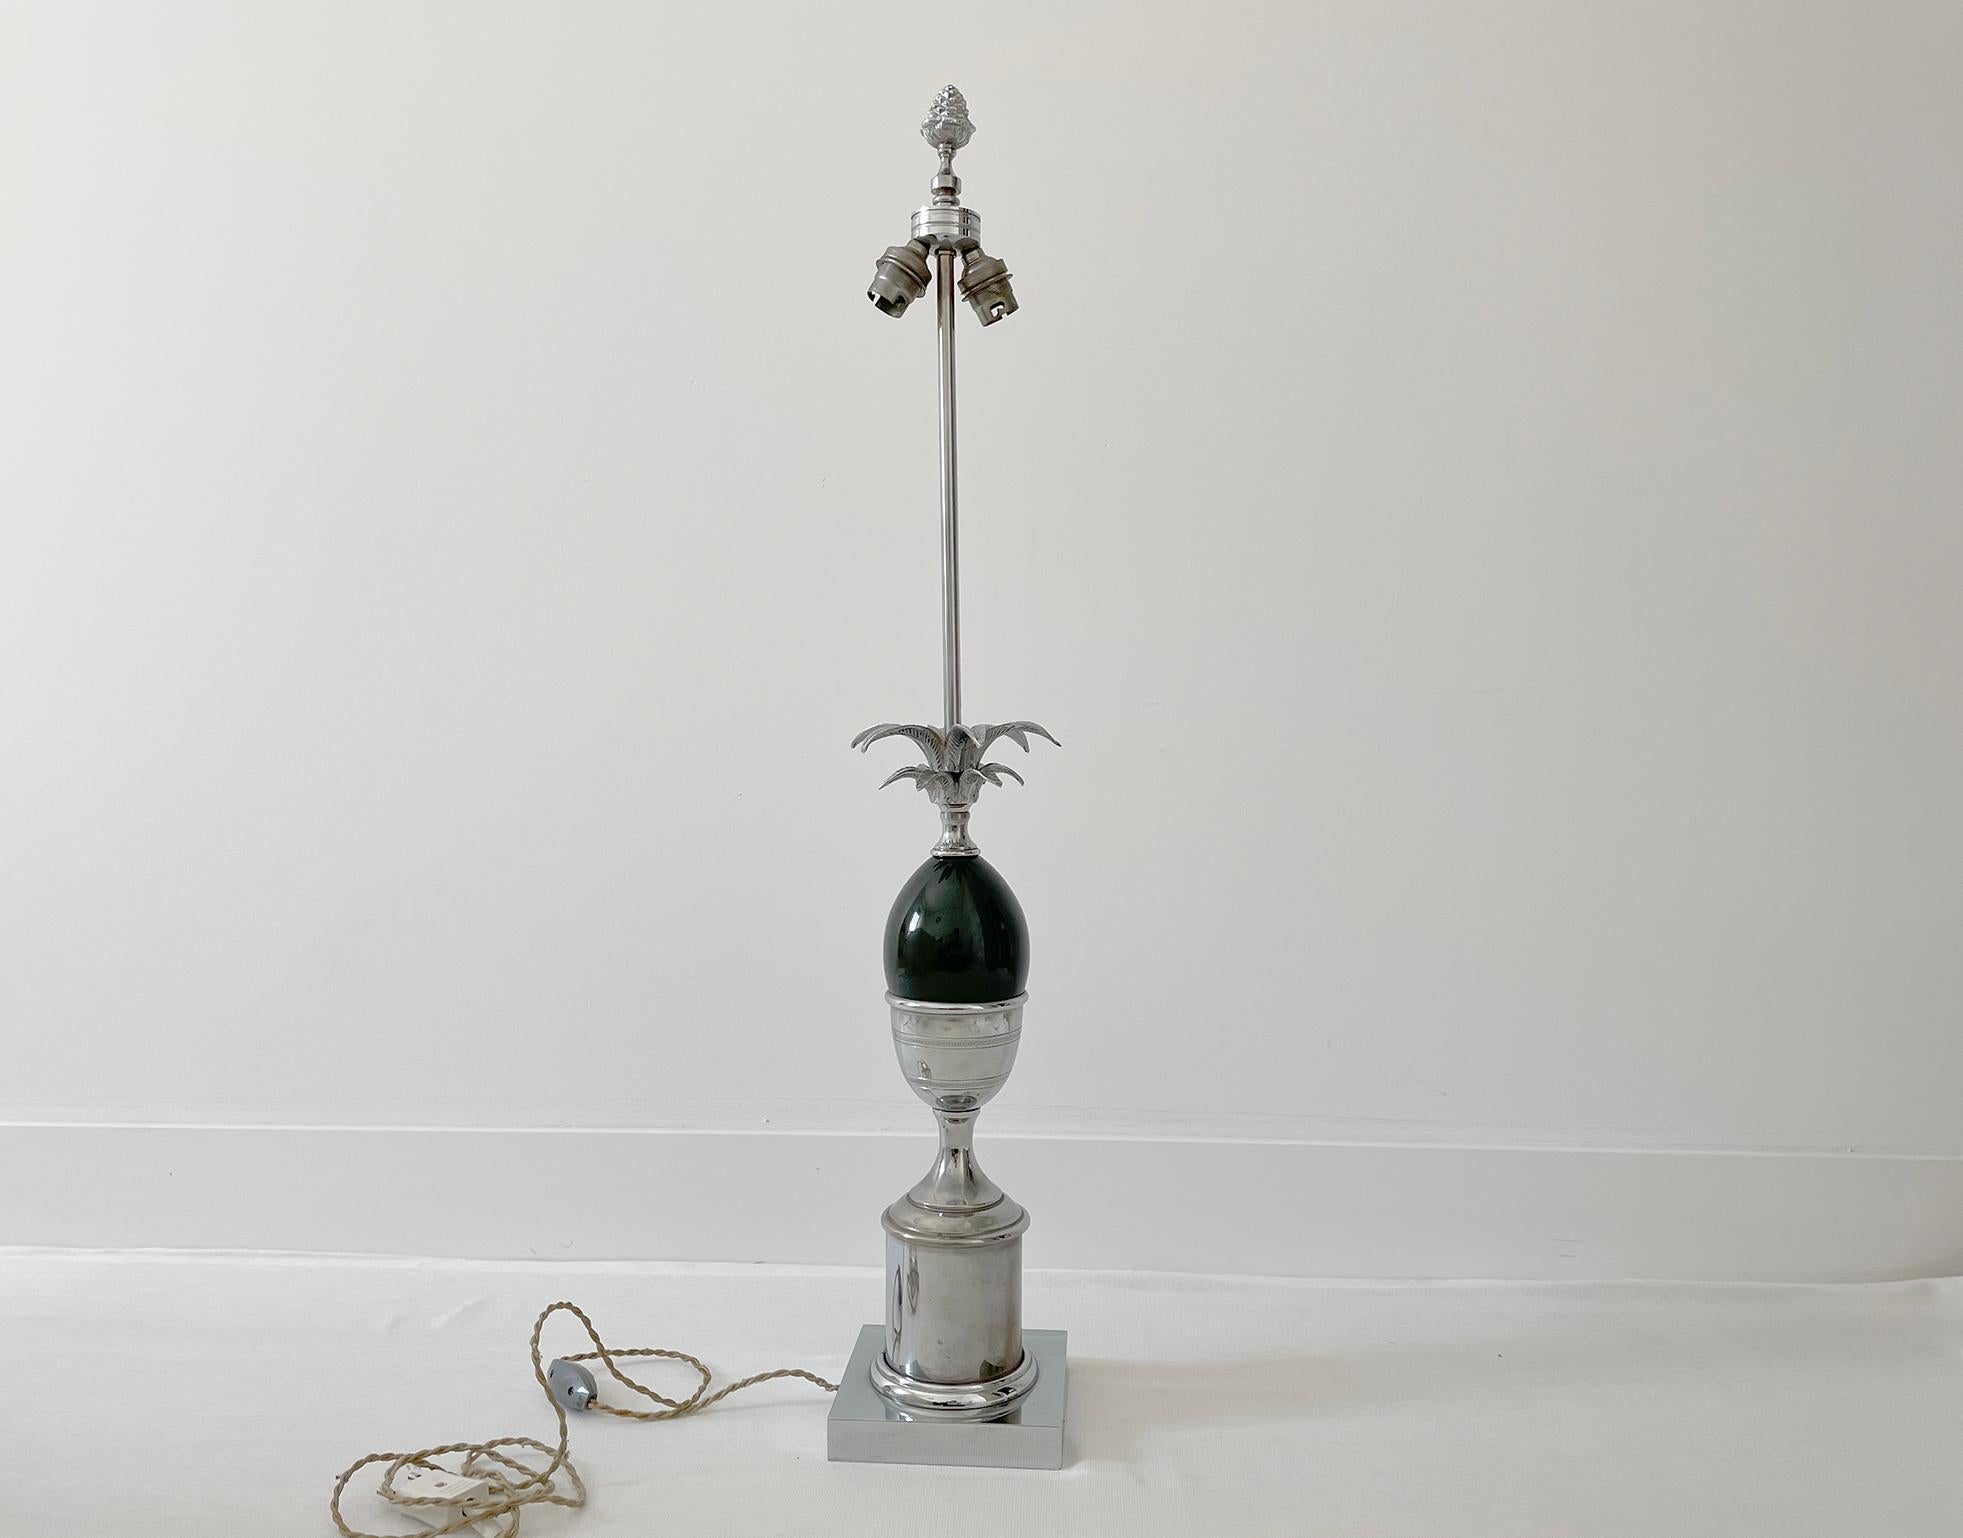 Maison Charles table lamp made in the 70s, finished in chrome or nickel-plated metal and a central pine cone made of bakelite, very dark green, wired with natural-color cord, off-white linen lampshade.
​